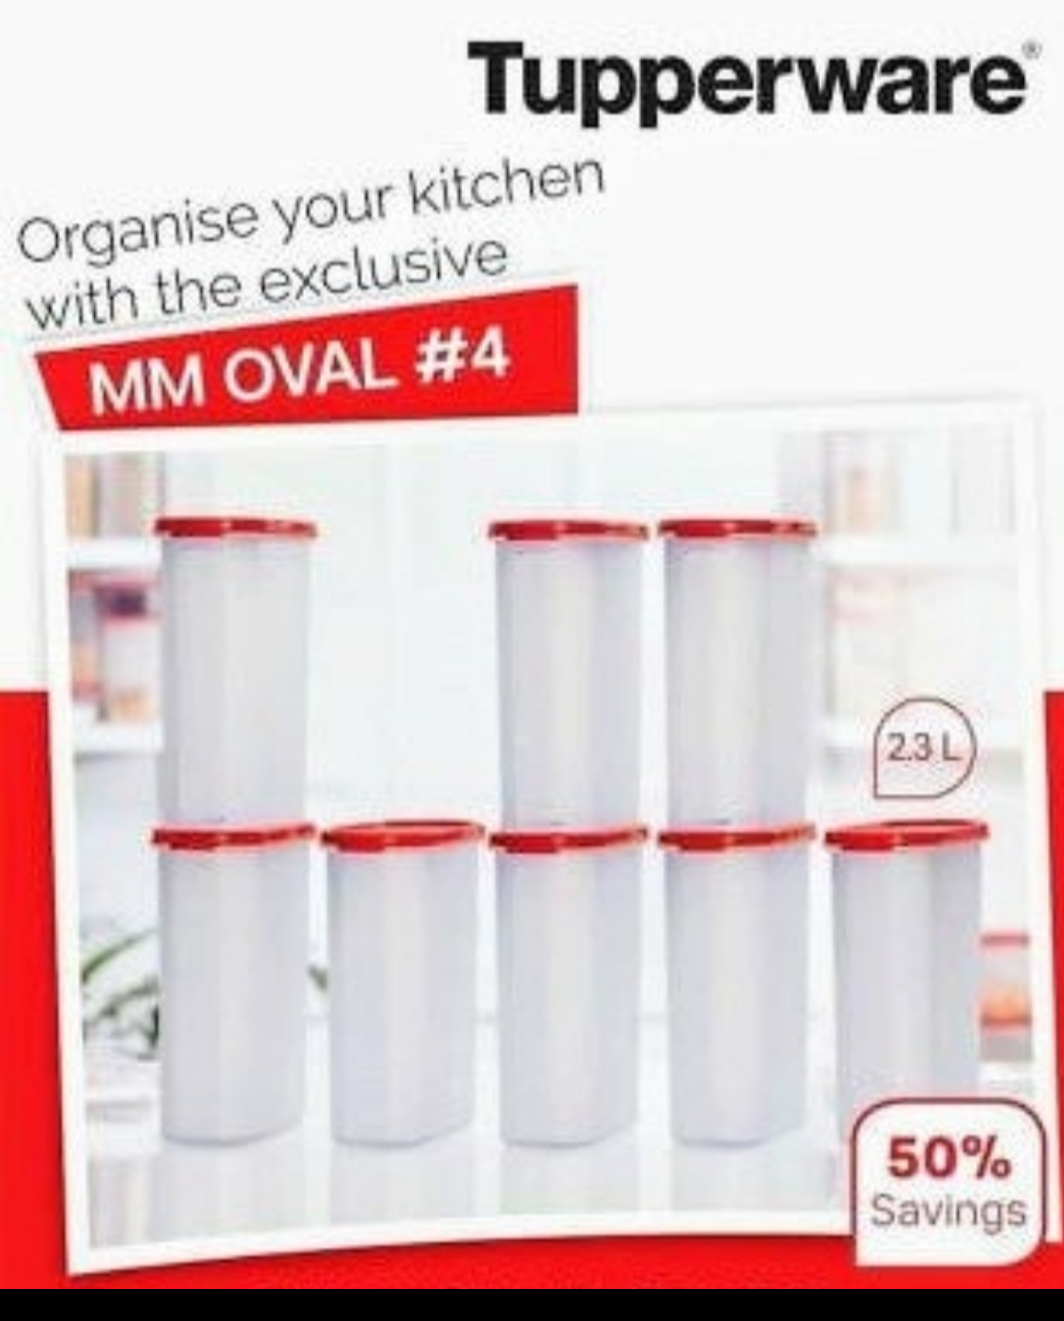 Tupperware MM Oval 4 Dry Storage containers 2.3 ltr set of 8 - The Indian Rang